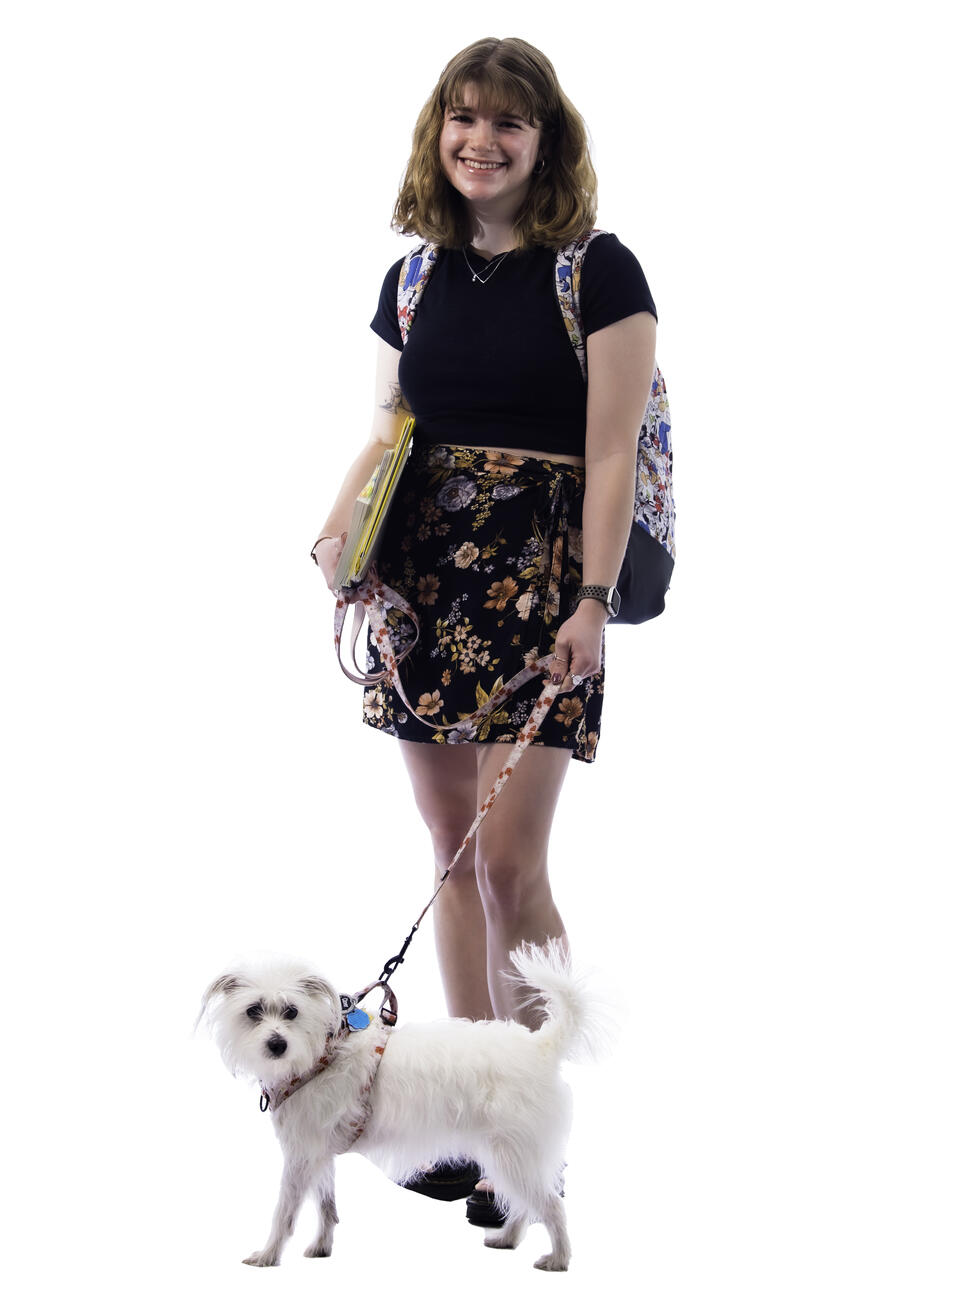 Micaela Champion poses while holding a textbook and her small white dog on a leash.